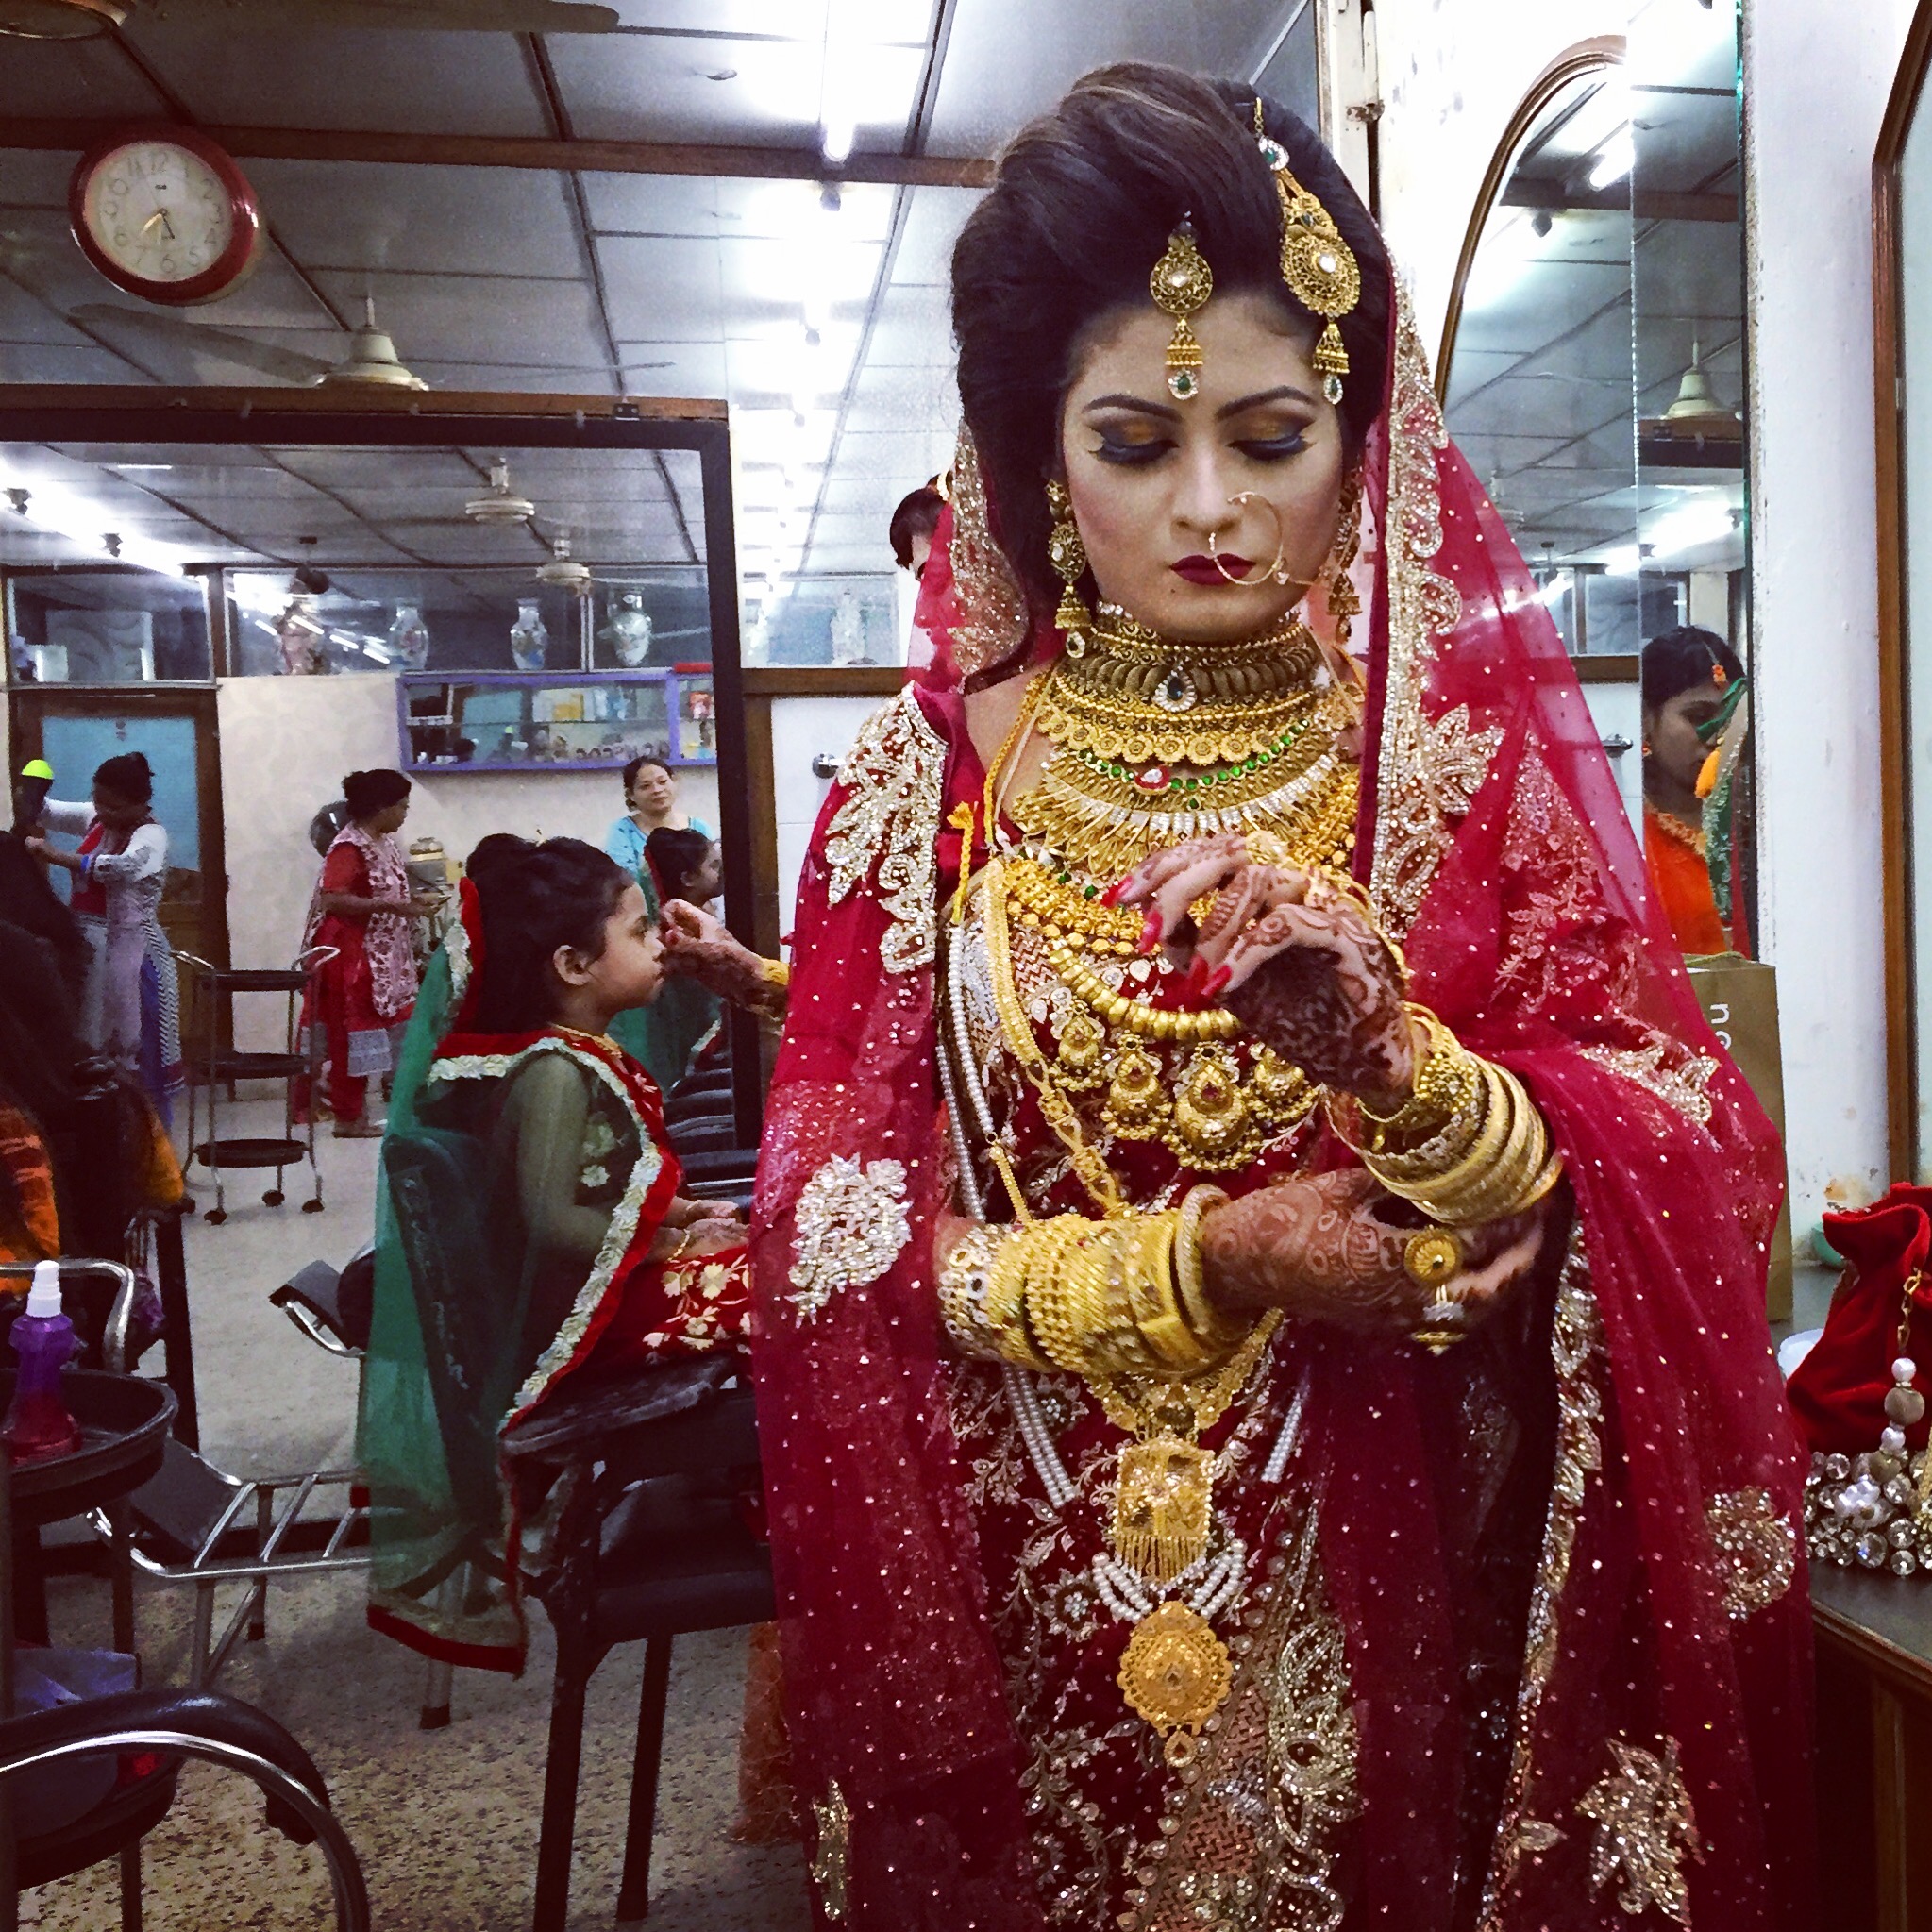  DHAKA | A bride-to-be puts on her gold bangles, the last step in a lengthy process of preparing for her nuptials. July 27, 2016.&nbsp; 